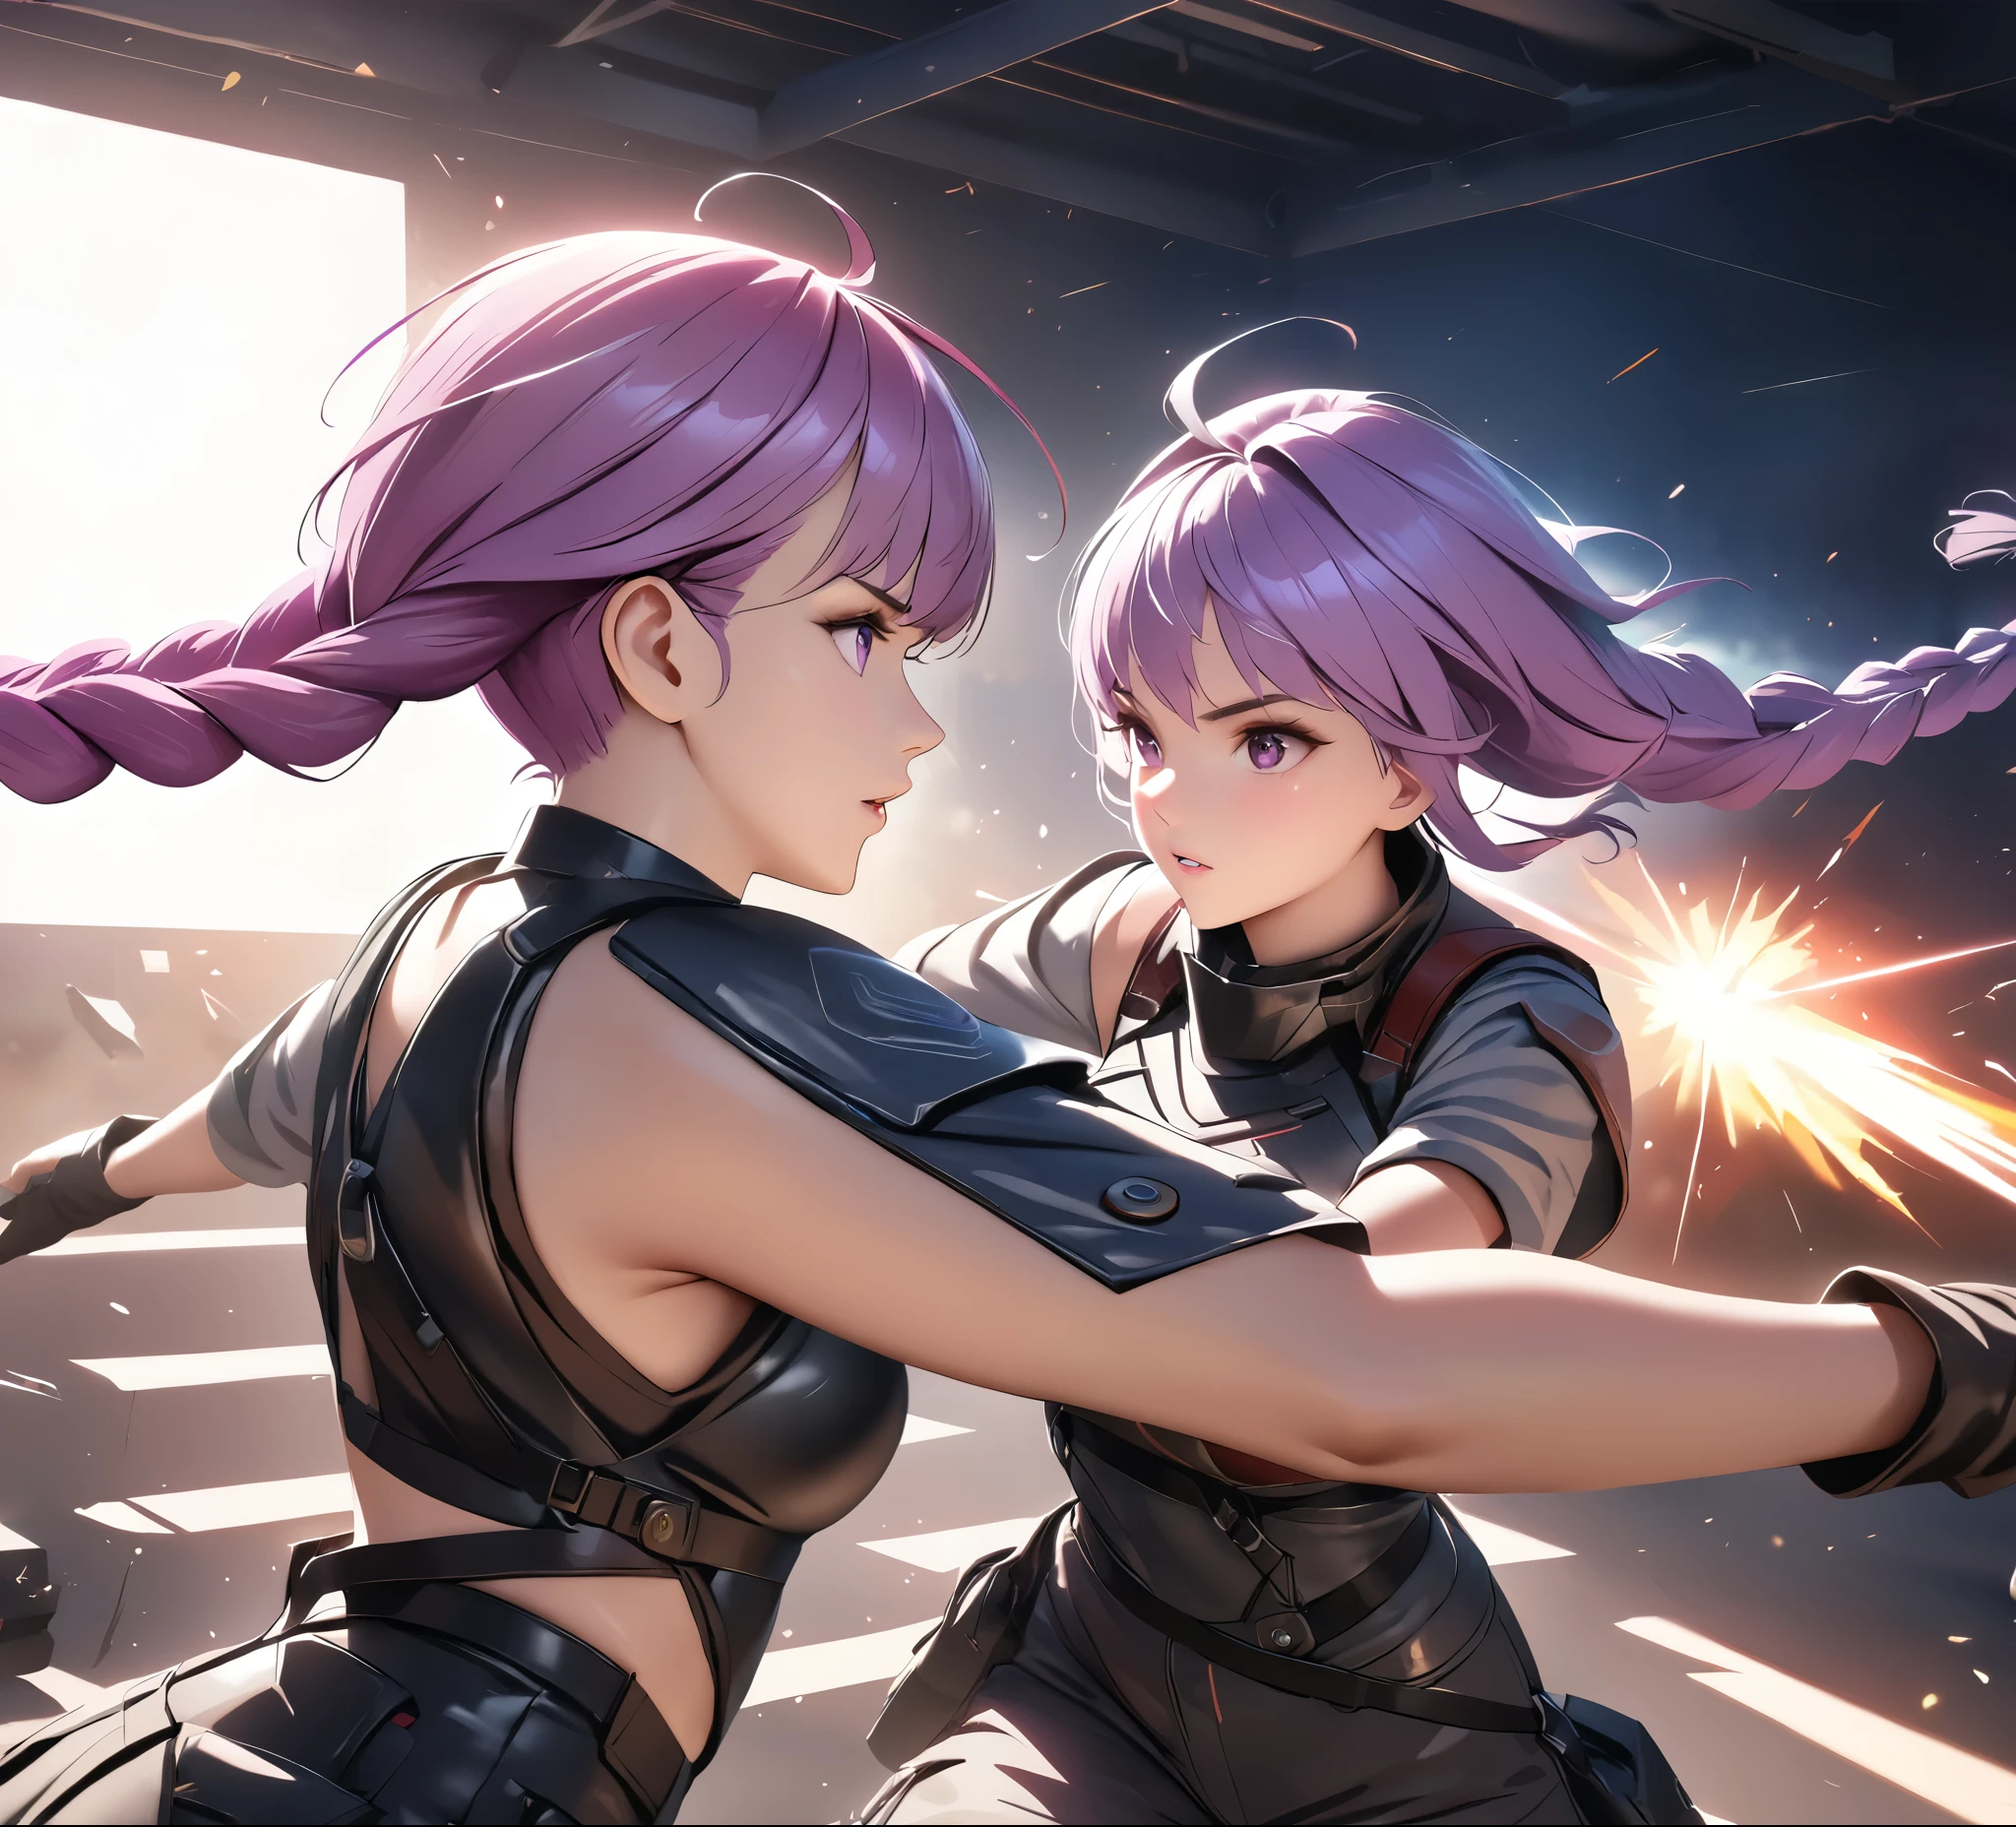 1 boy,a girl with purple and white gradient double braids,Intense showdown, eye contact, tense atmosphere, battle outfits, fierce combat, both enemies and friends, dynamic action capture, interplay of light and shadow, best quality, 4k, 8k, highres, masterpiece:1.2, ultra-detailed, realistic, photorealistic:1.37, HDR, UHD, studio lighting, extreme detail description, professional, vivid colors, bokeh, portraits, action, dramatic lighting